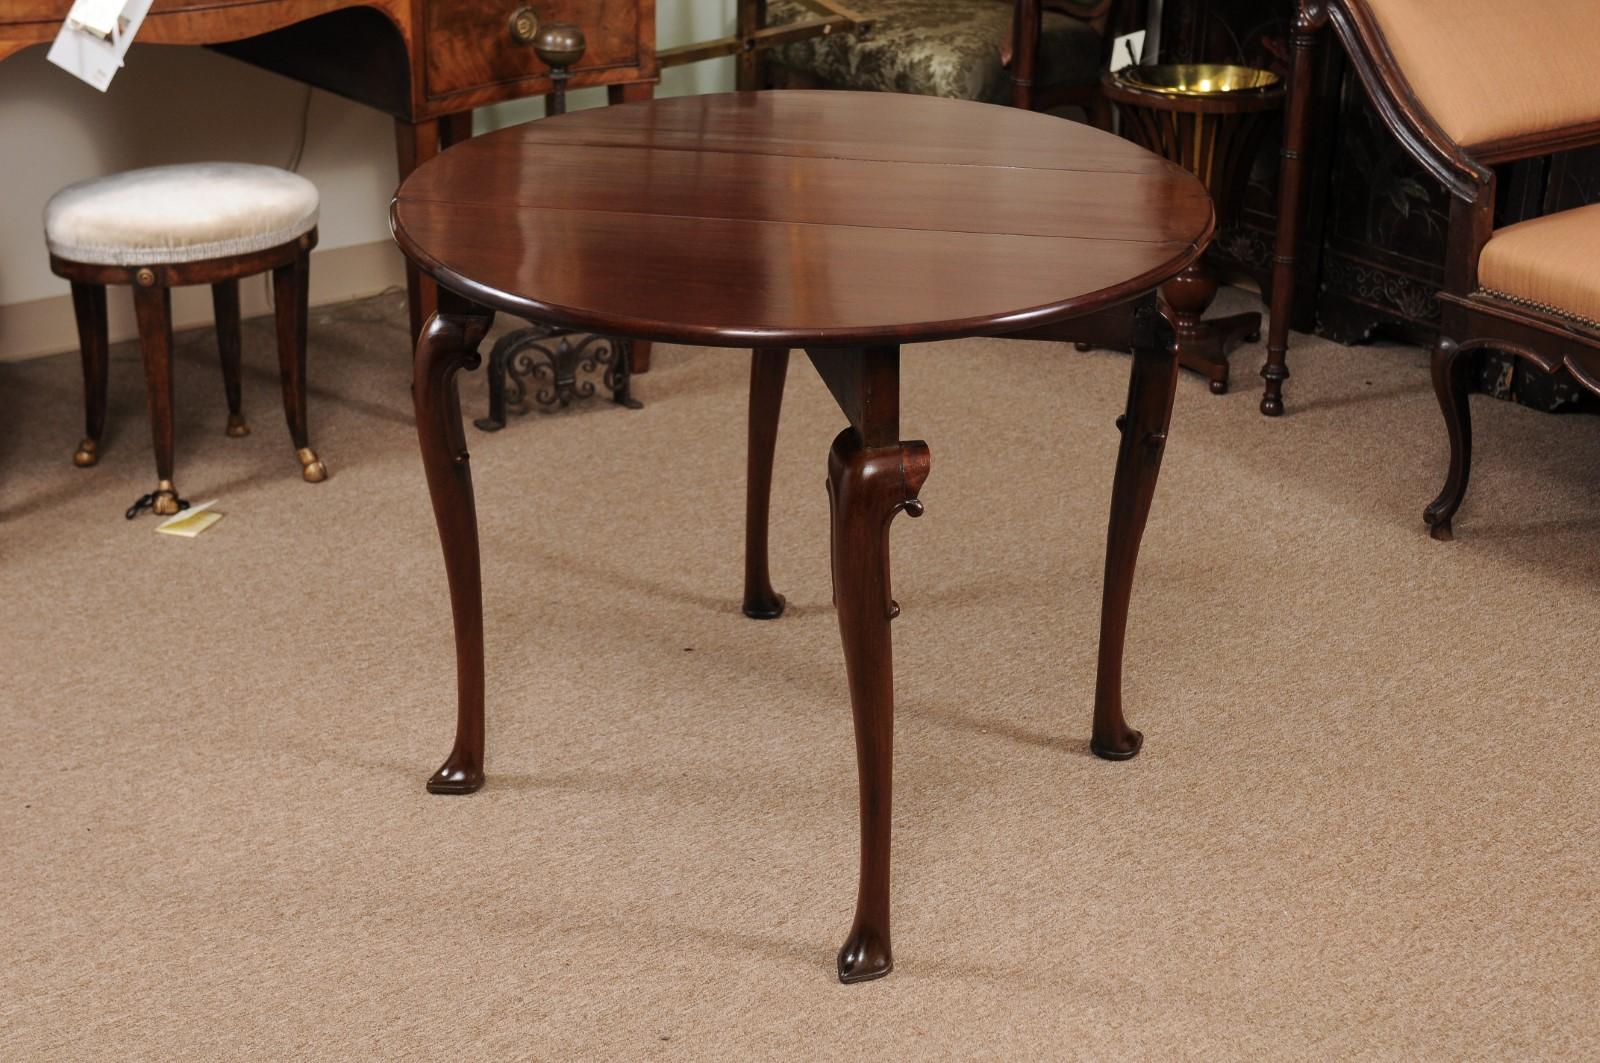 Mahogany 18th Century English Queen Anne Drop Leaf Table with Slipper Foot